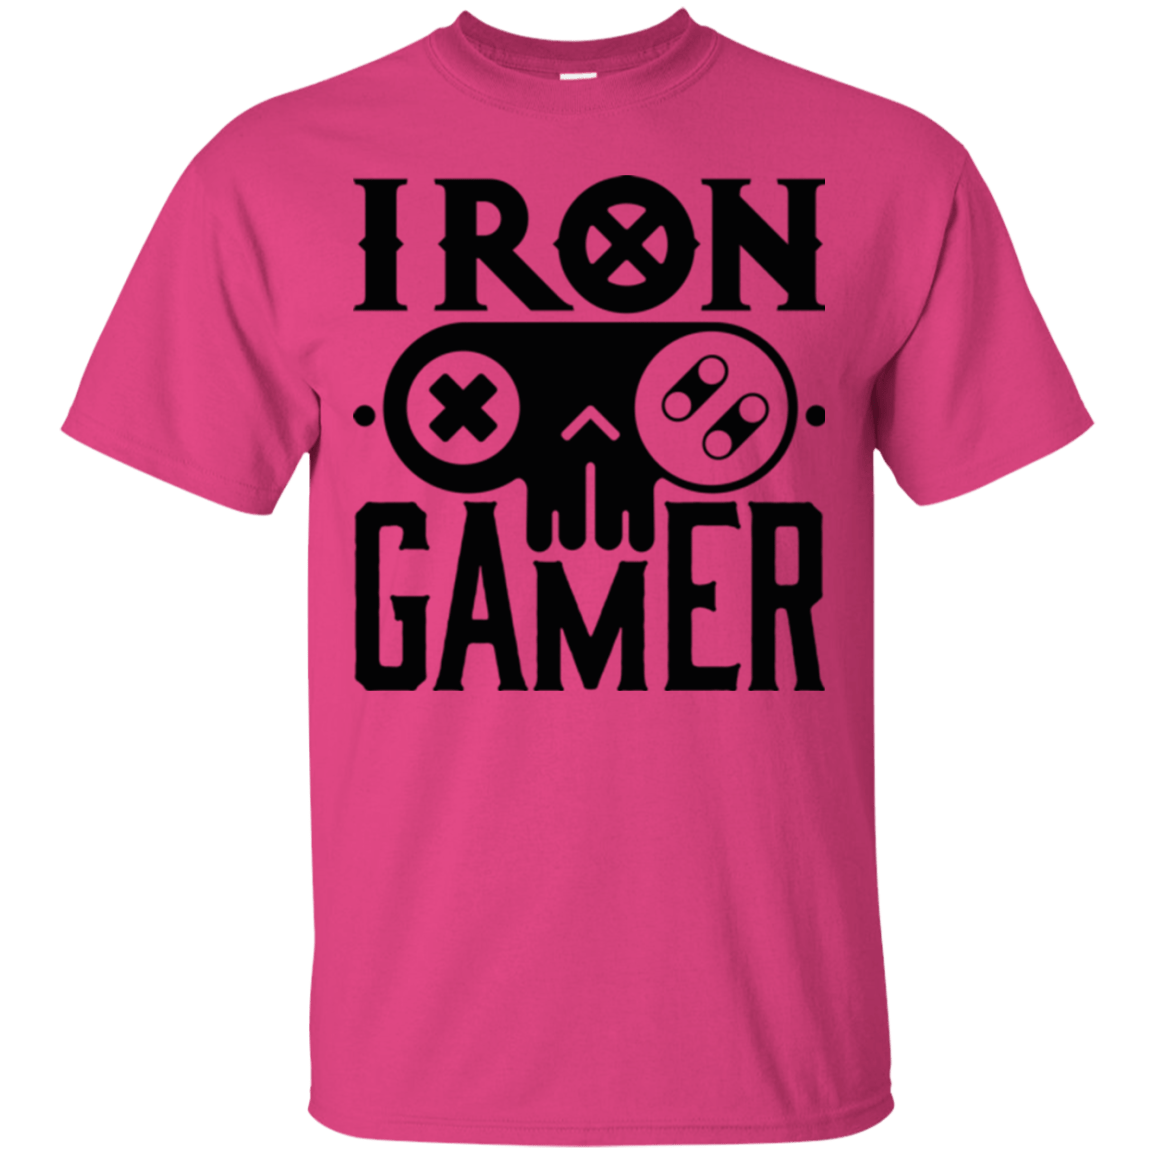 T-Shirts Heliconia / Small Iron Gamer T-Shirt